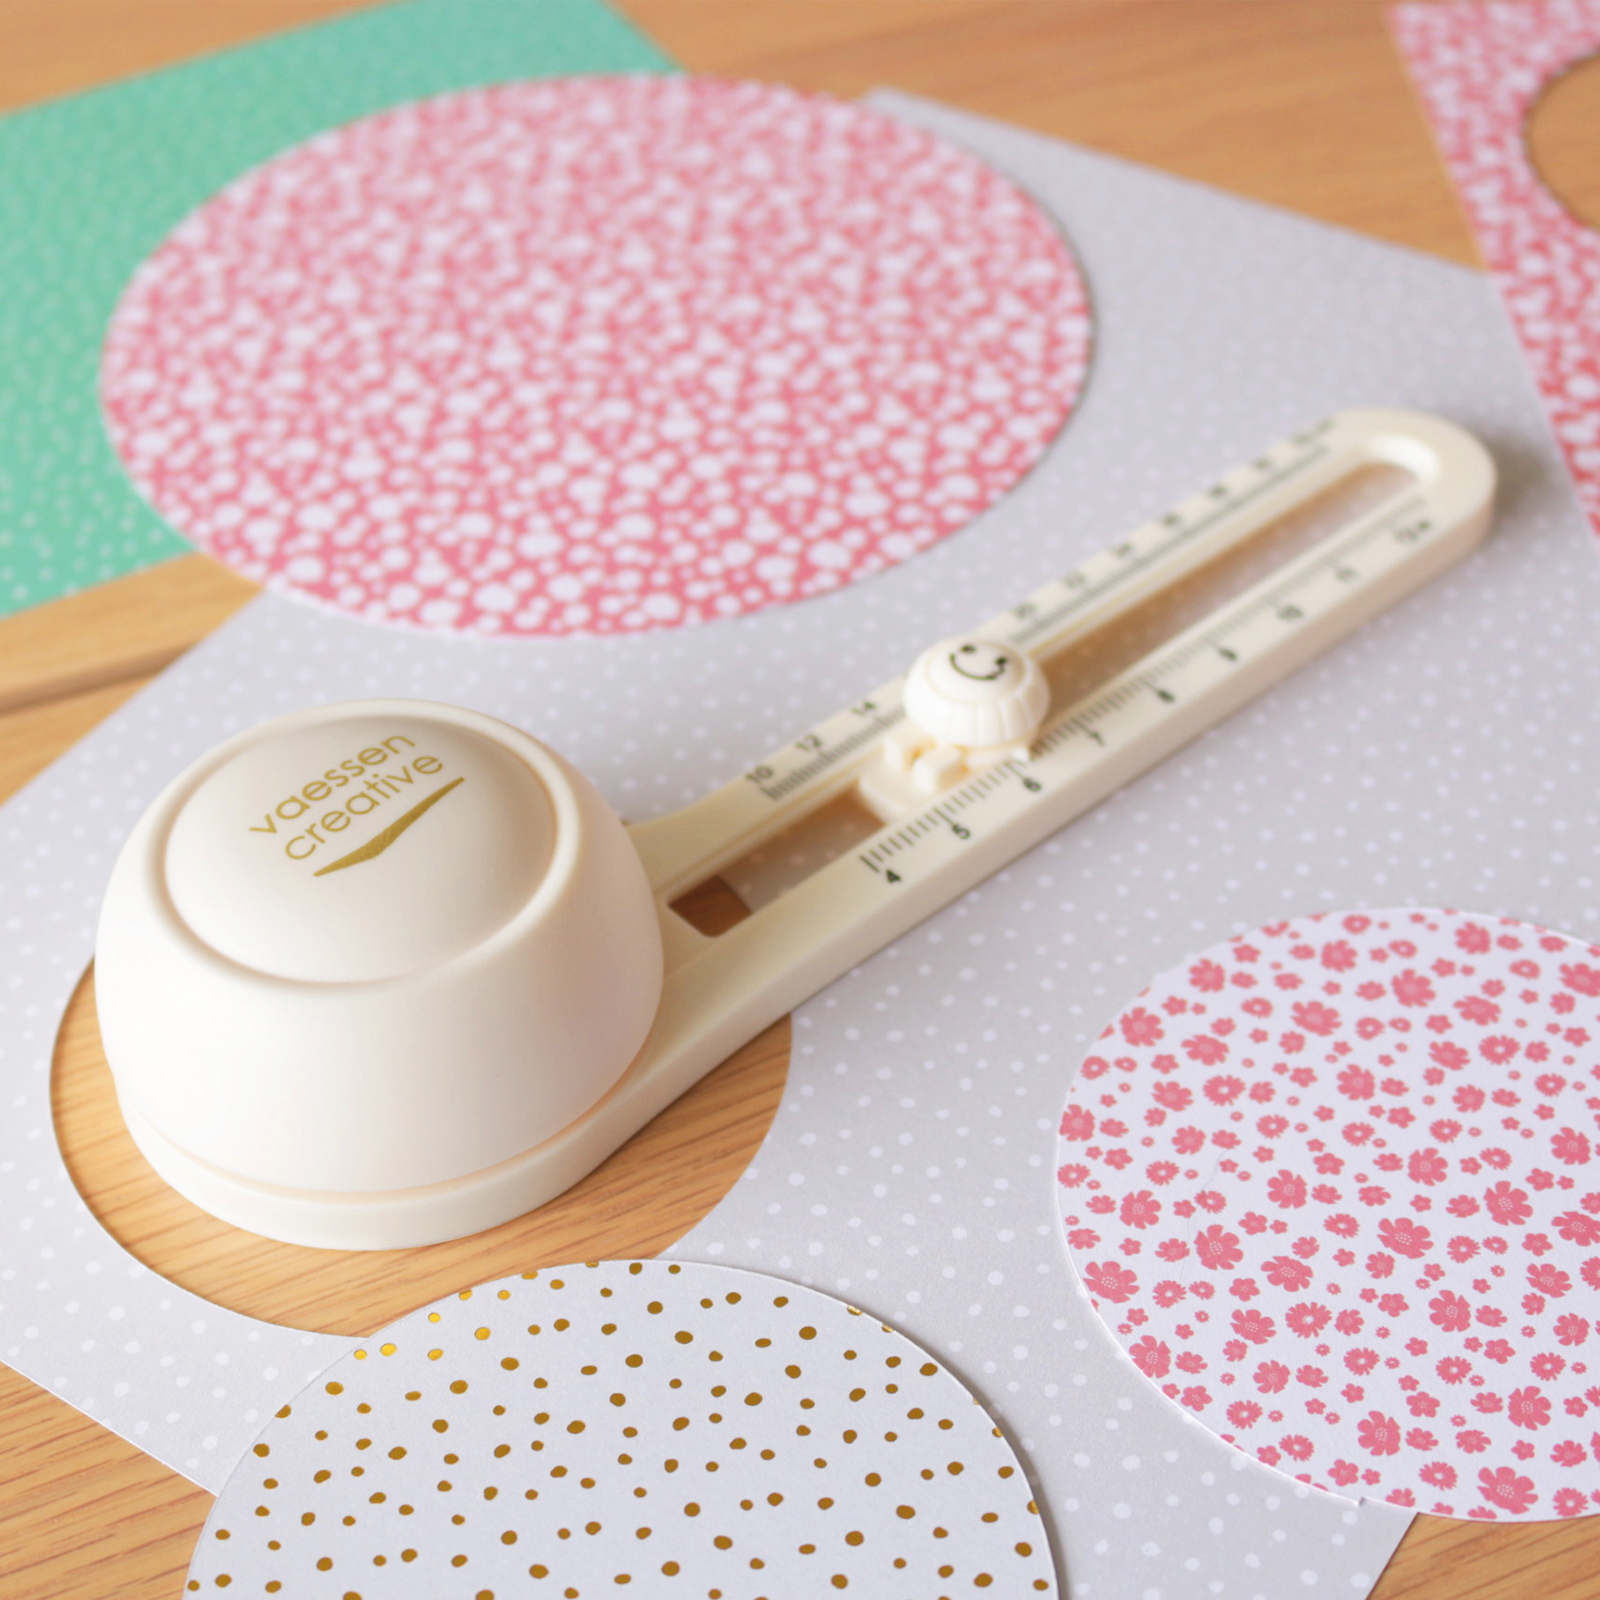 Perfect circles made easy with this circle cutter!